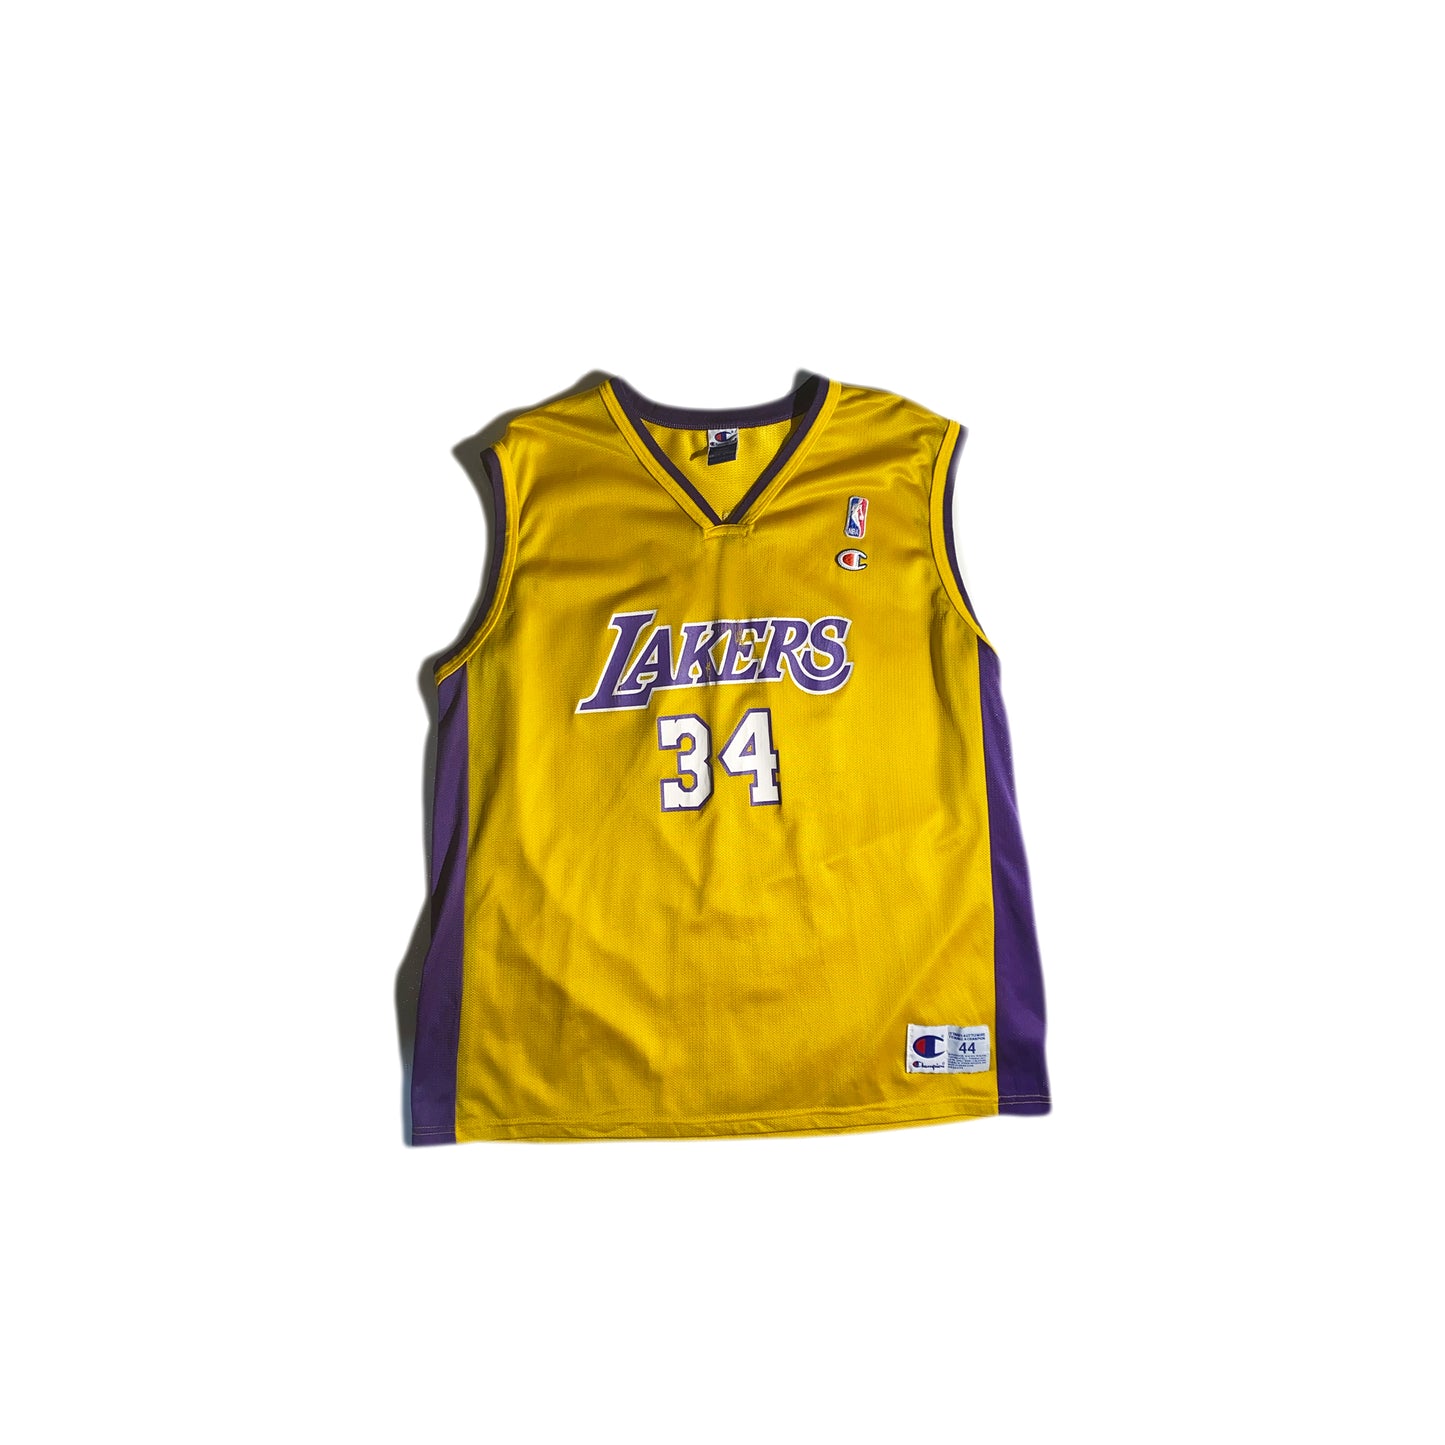 Vintage Shaquille O'Neil Jersey L.A. LAKERS